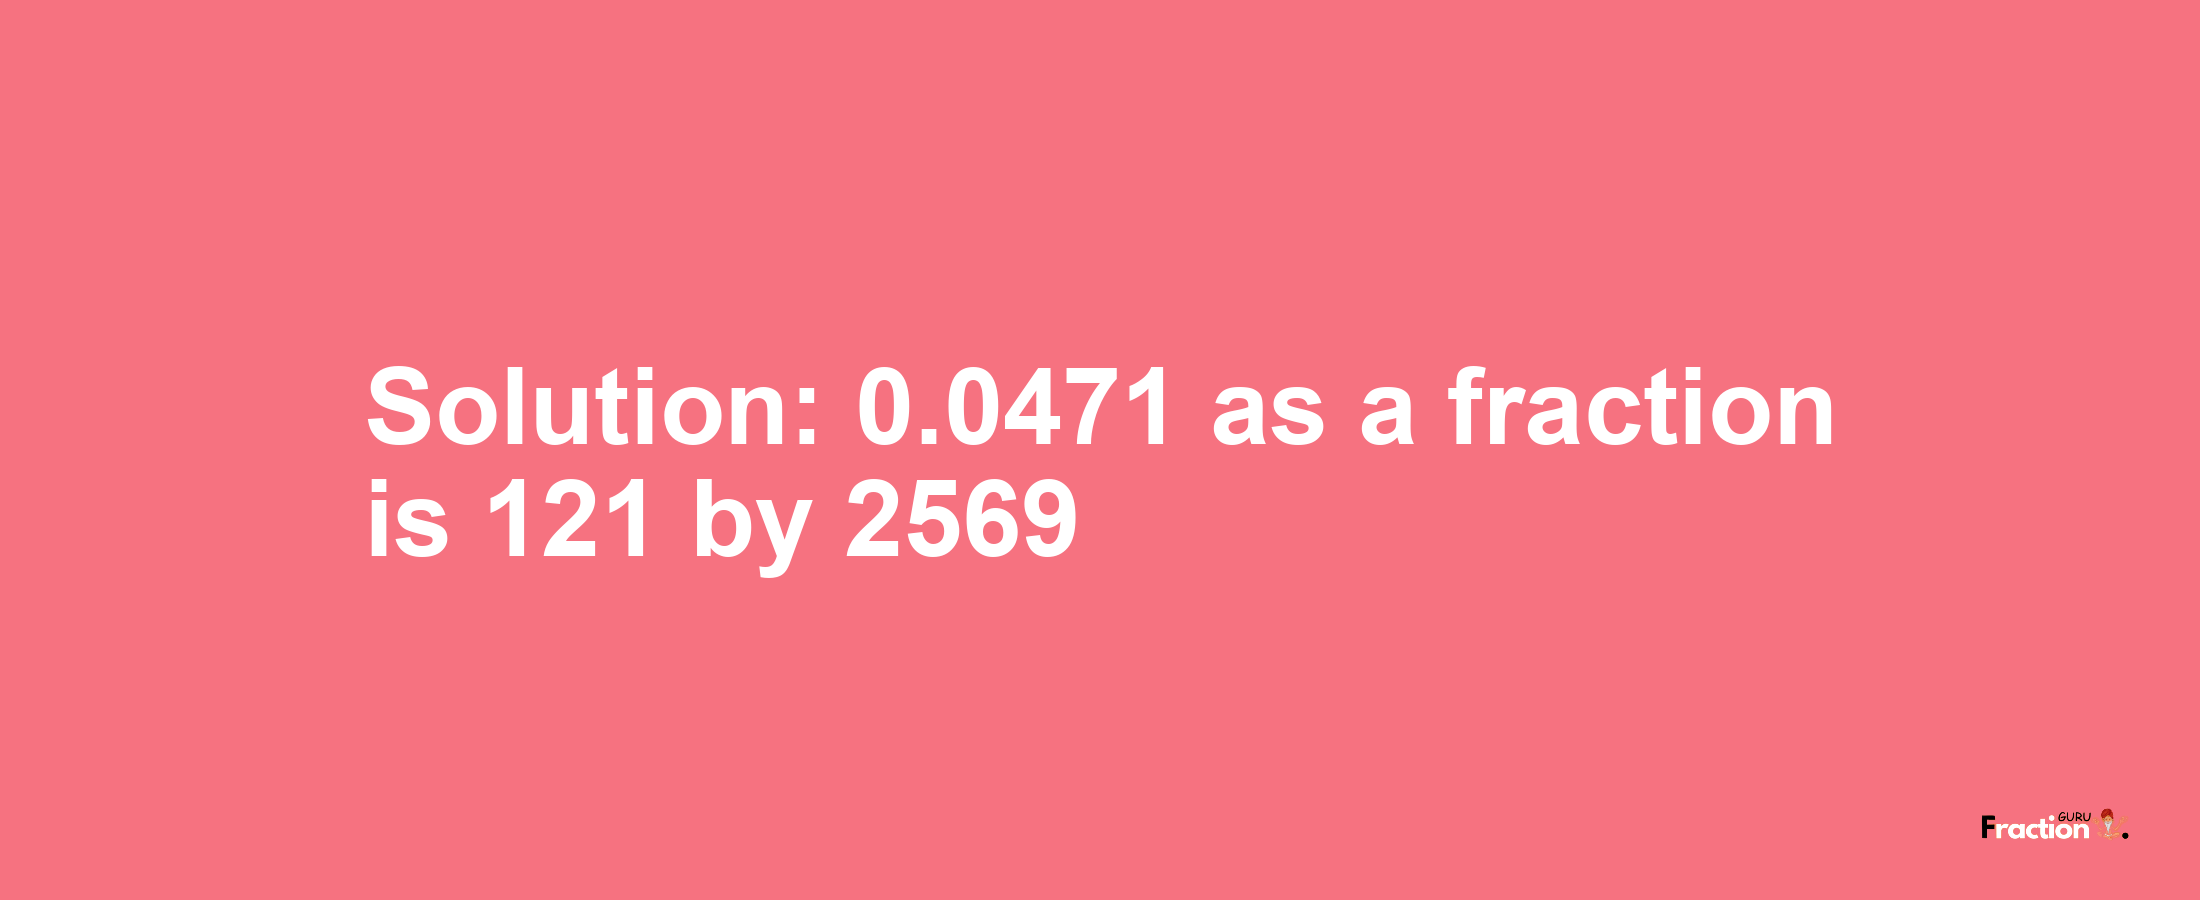 Solution:0.0471 as a fraction is 121/2569